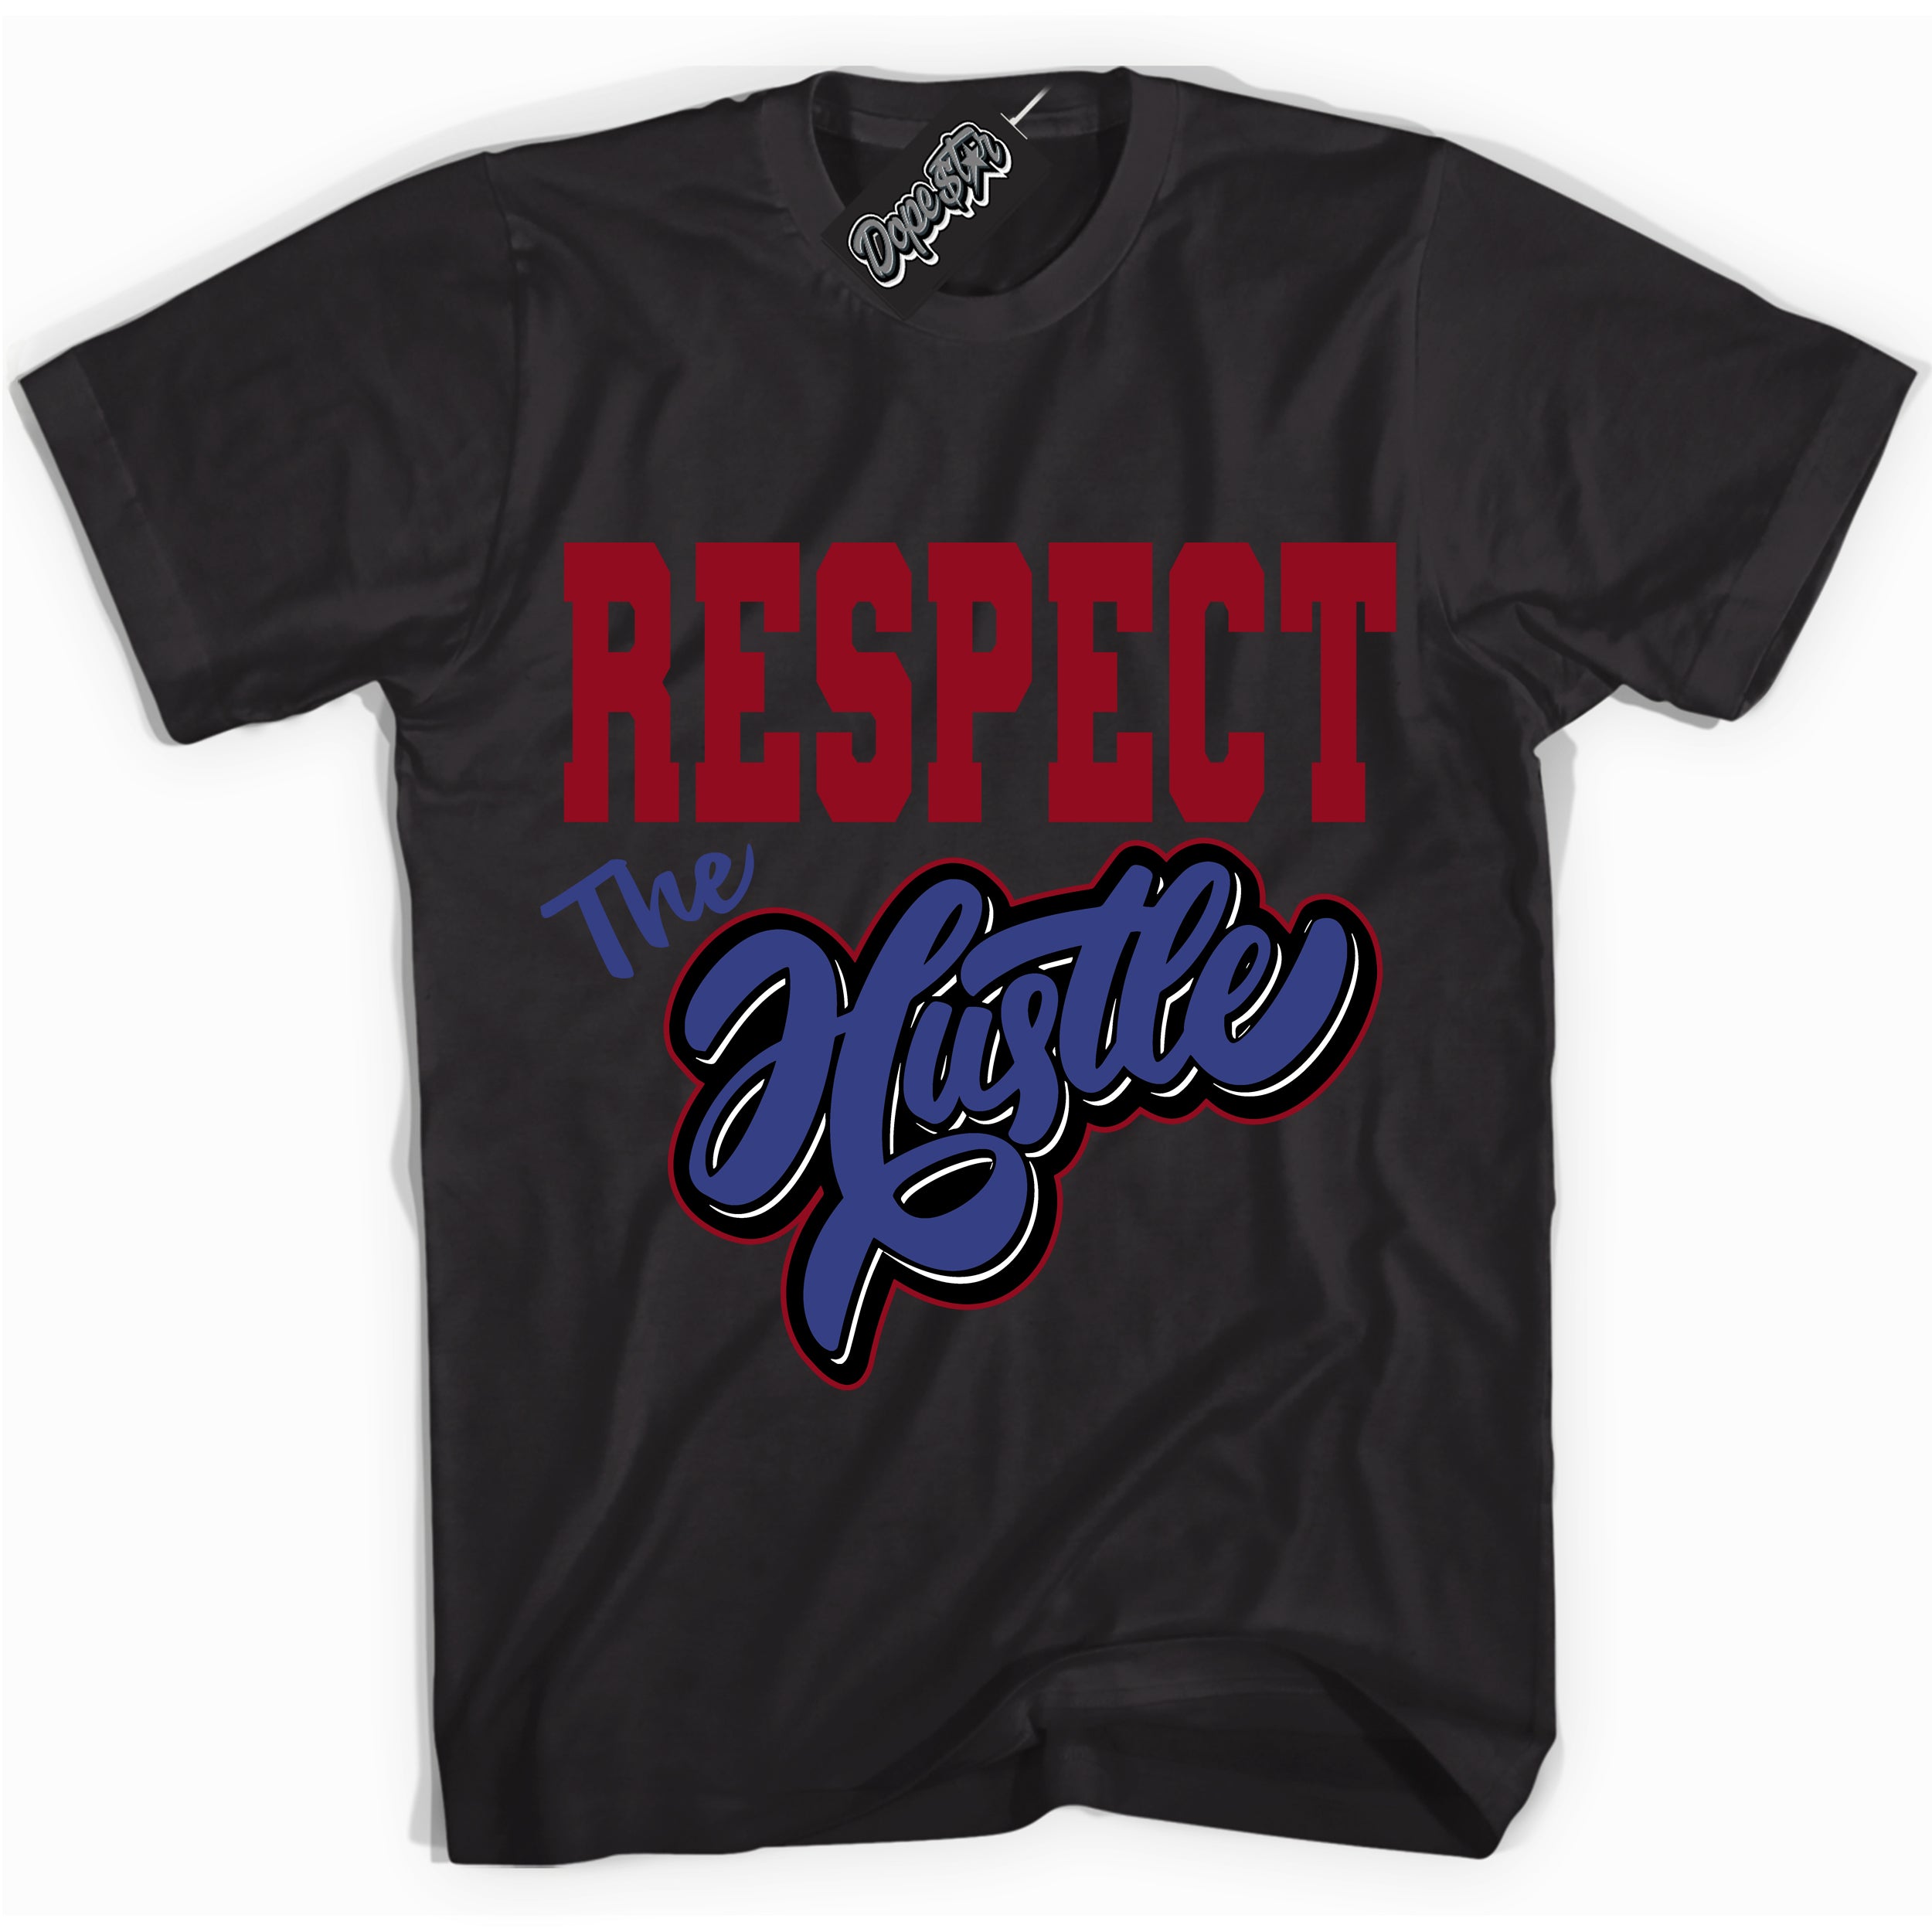 Cool Black Shirt with “ Respect The Hustle ” design that perfectly matches Playoffs 8s Sneakers.